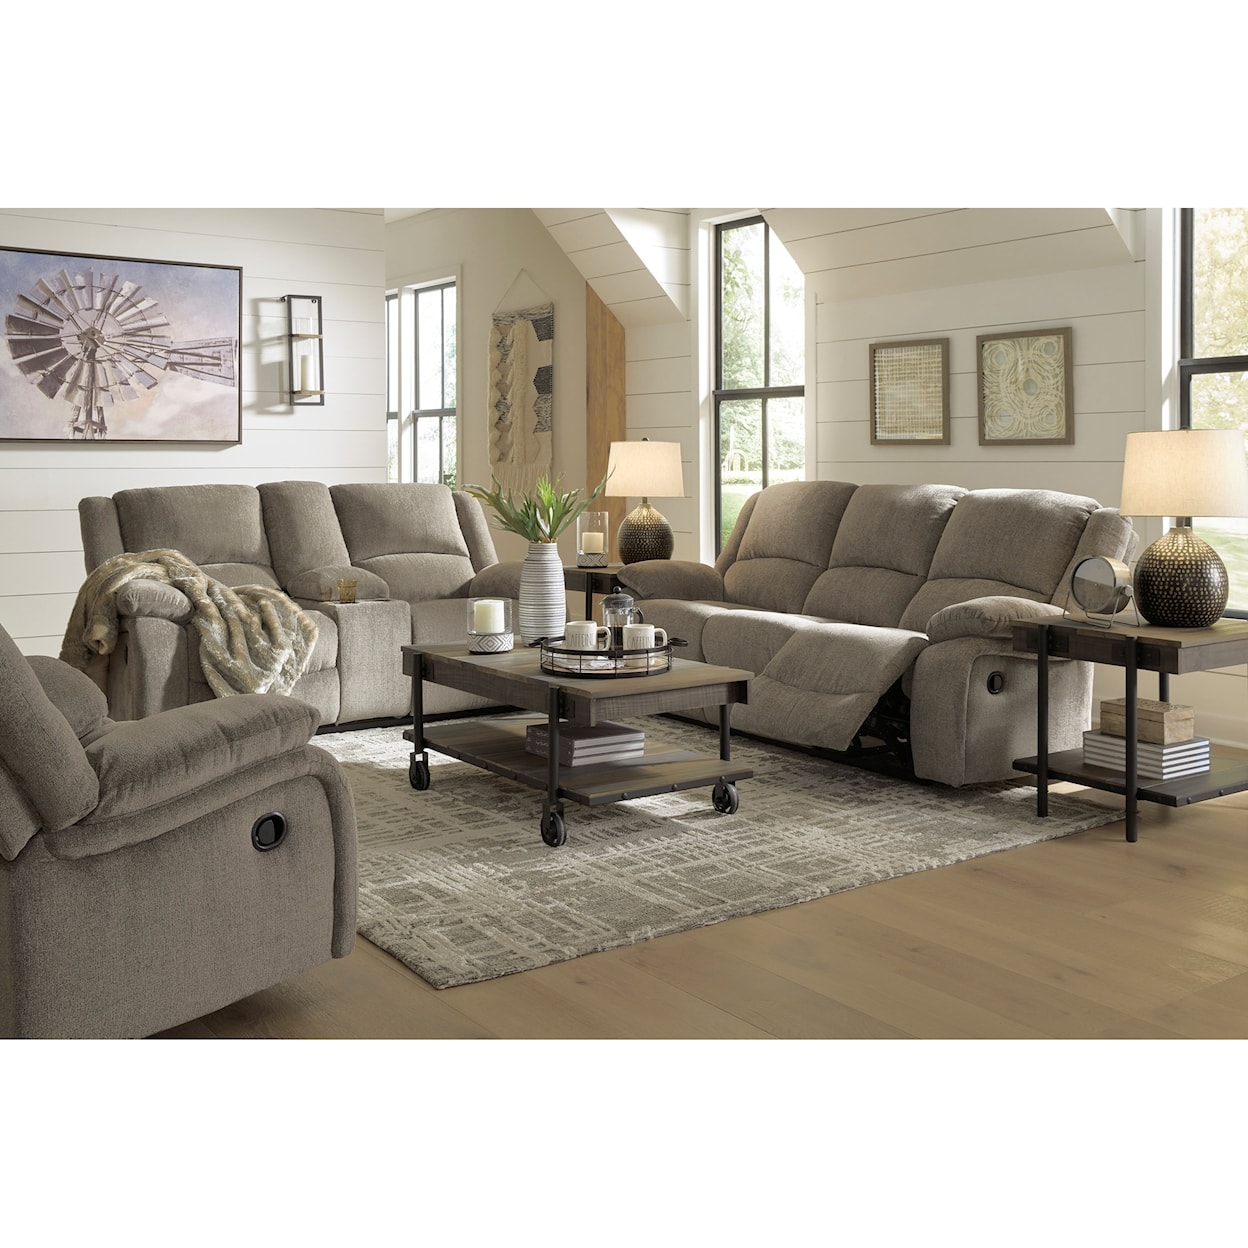 Signature Design by Ashley Draycoll Power Reclining Living Room Group